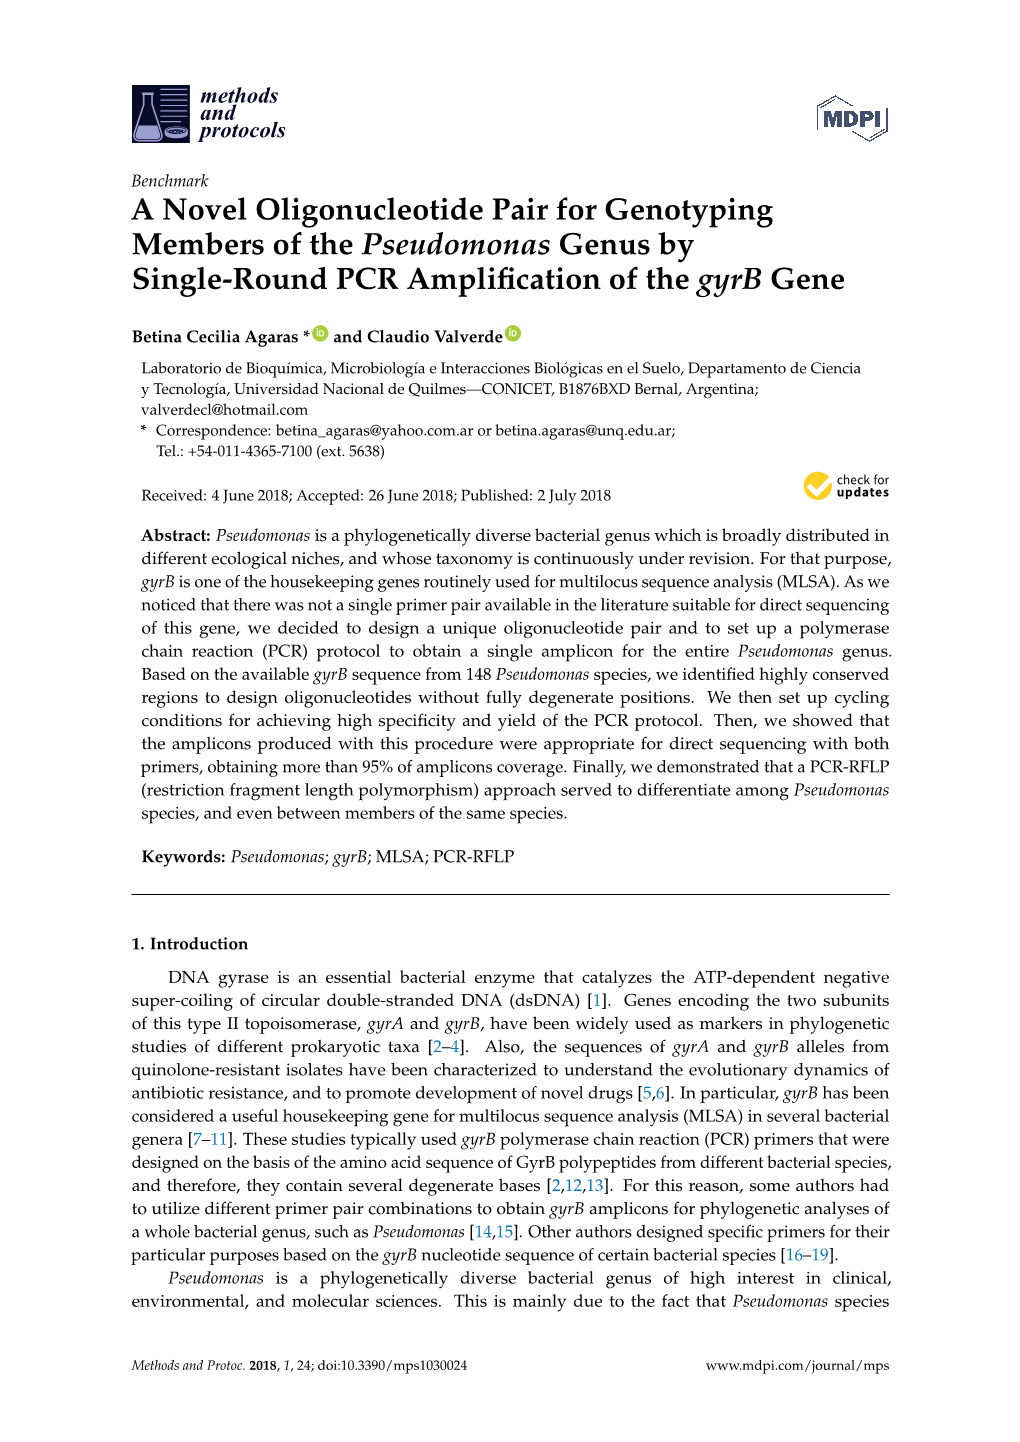 A Novel Oligonucleotide Pair for Genotyping Members of the Pseudomonas Genus by Single-Round PCR Ampliﬁcation of the Gyrb Gene